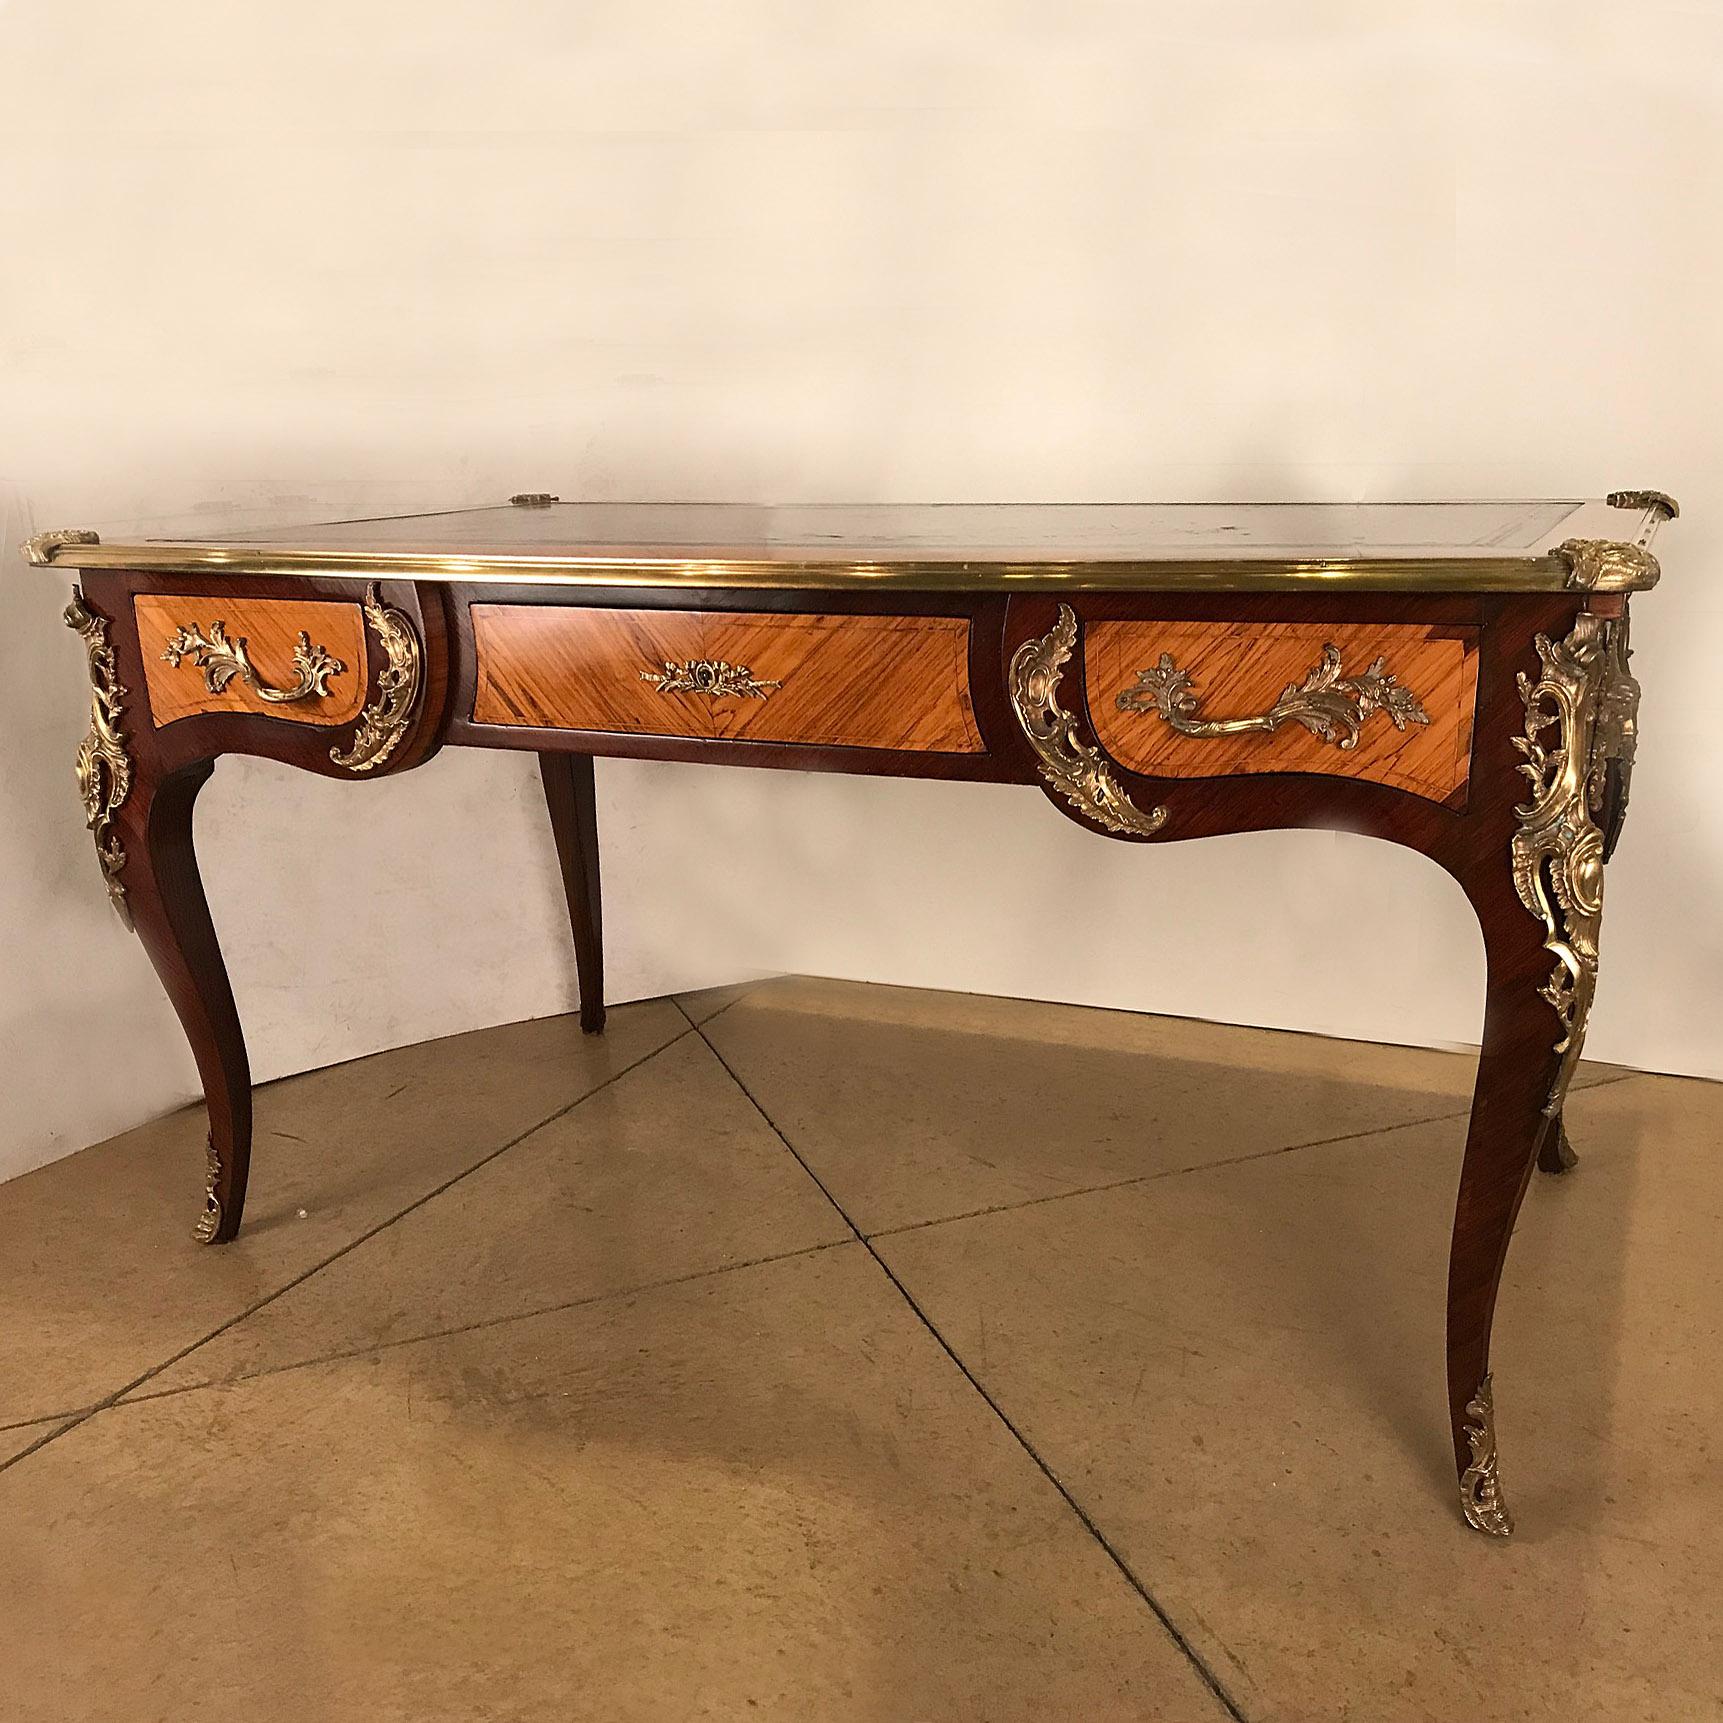 This fine piece dates from the third quarter of the 19th century and has many of the characteristics of a period piece, although made later. The mahogany is exceptionally well-chosen, the bronze mounts are of high quality and well modelled. The desk